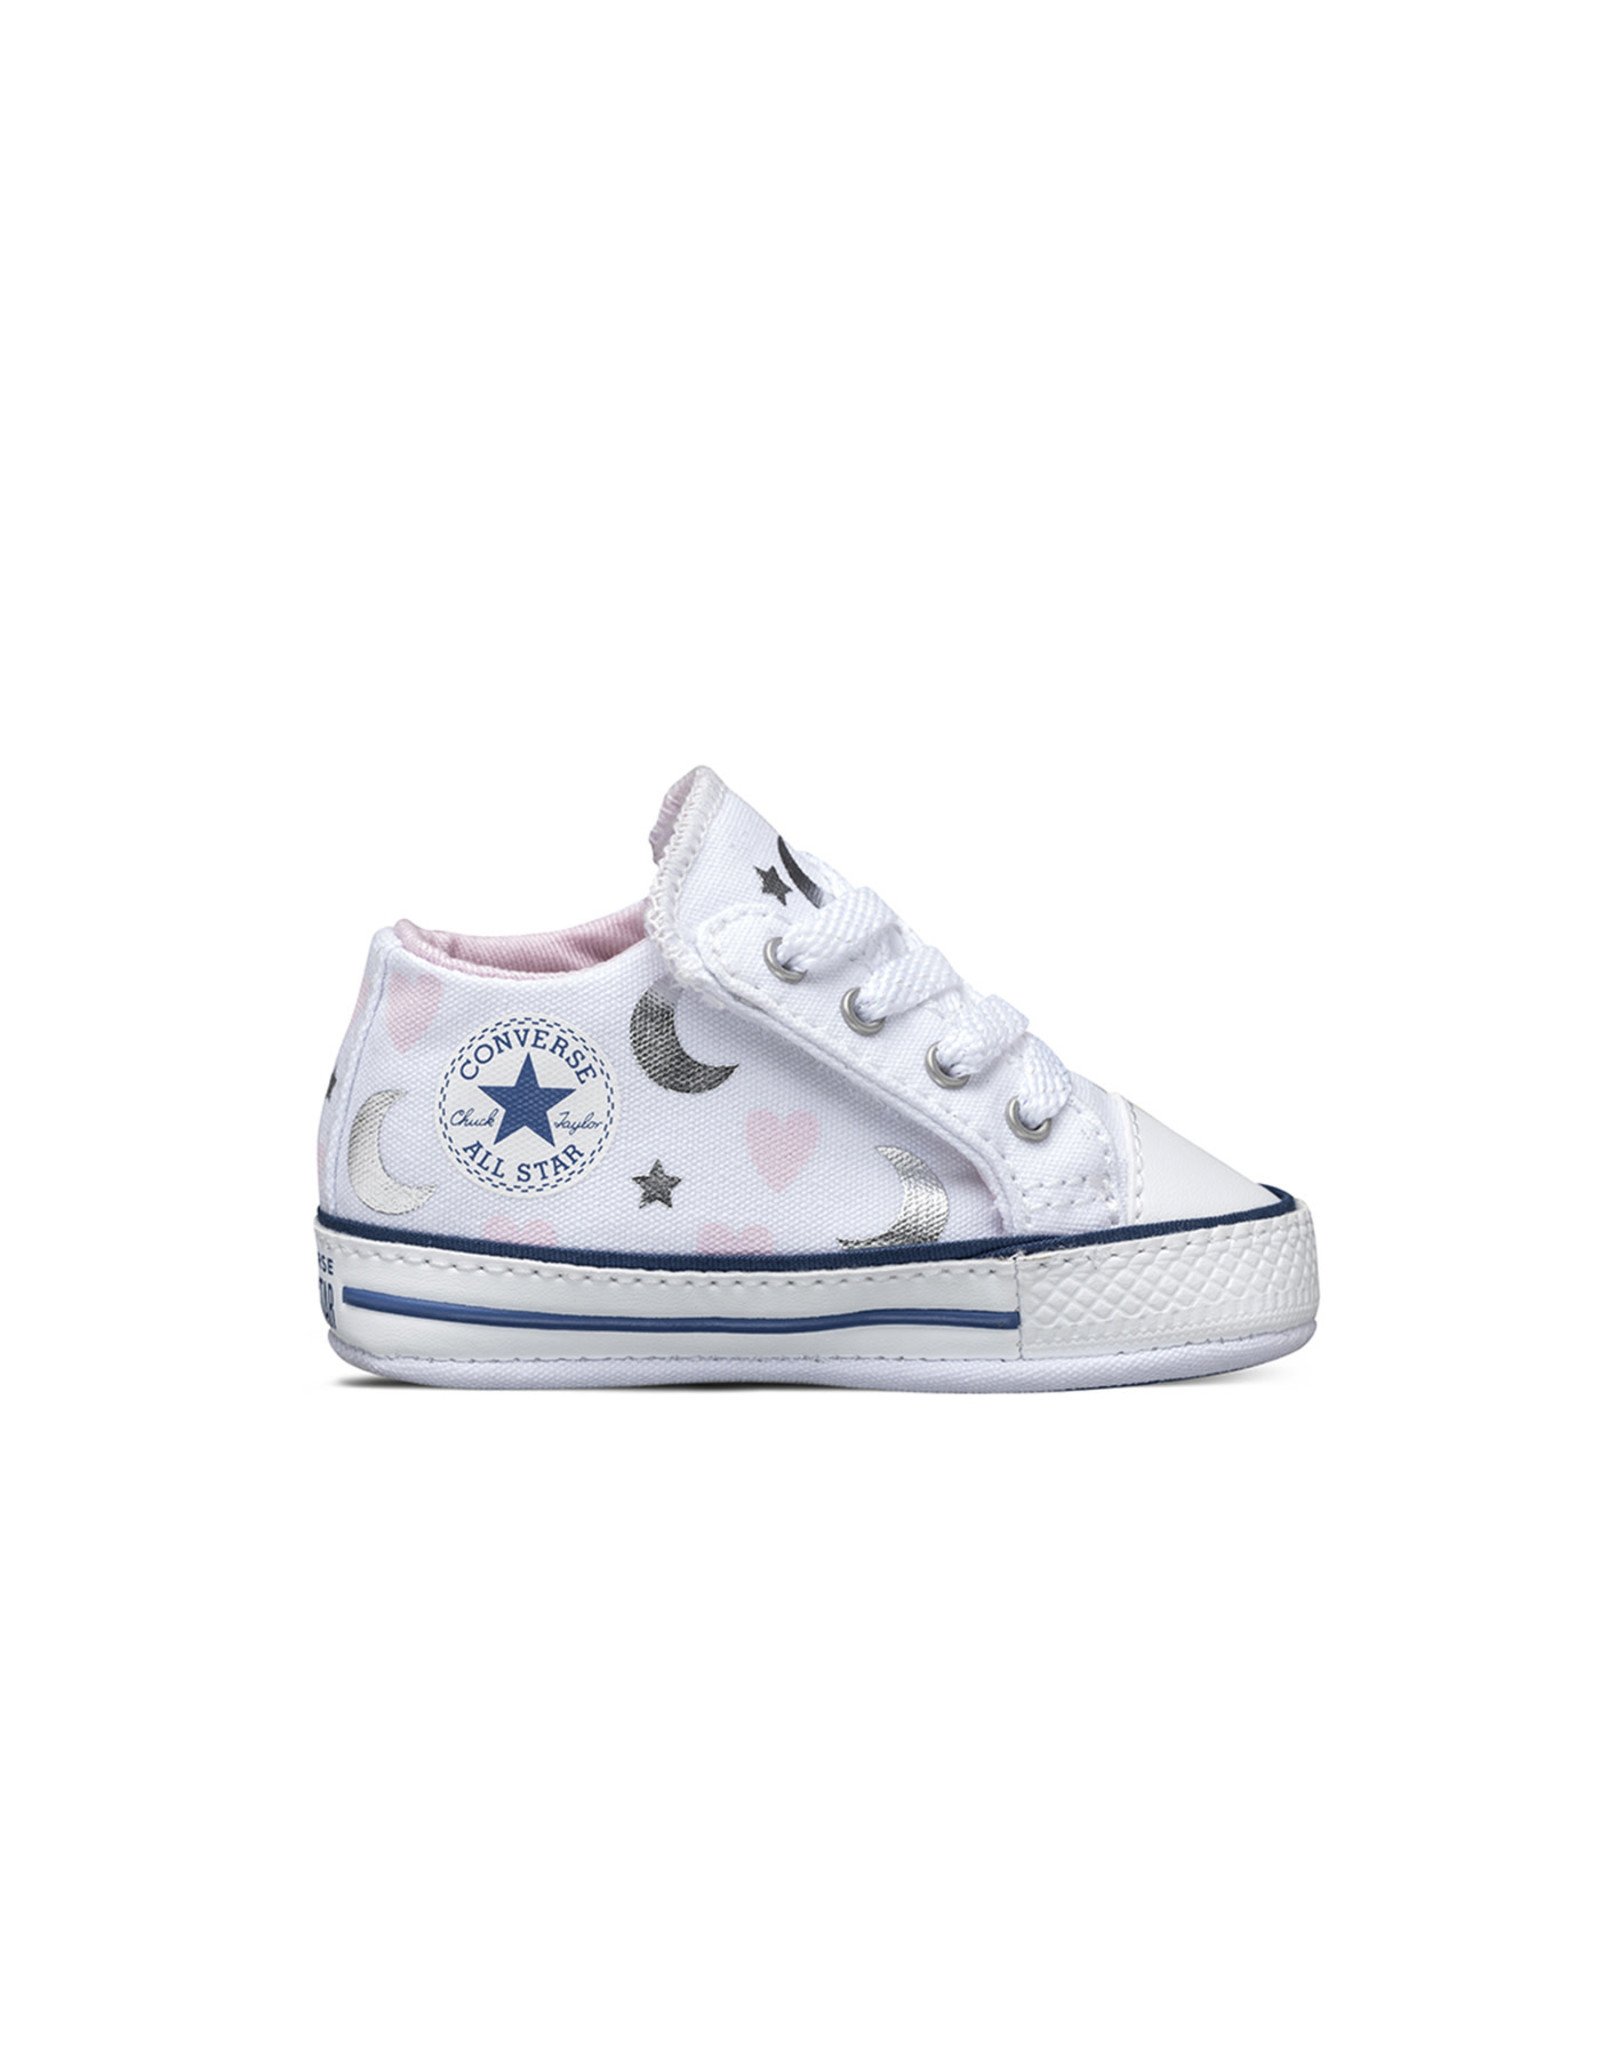 CONVERSE CT CRIBSTER MID WHITE/PINK/SILVER C12LUNA-871092C